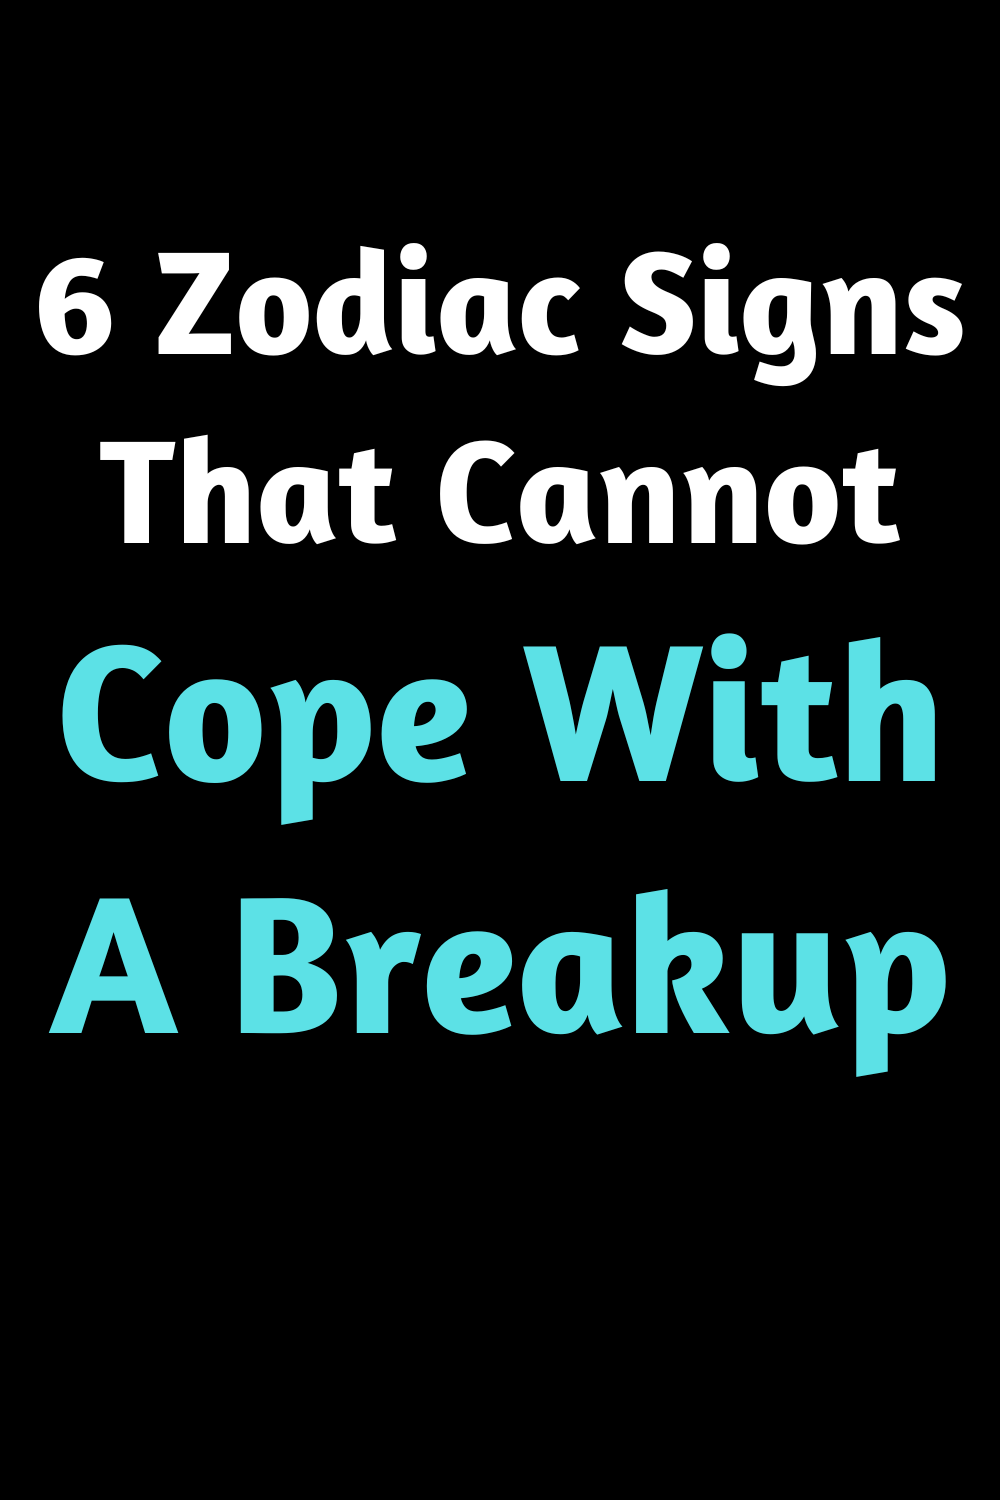 6 Zodiac Signs That Cannot Cope With A Breakup